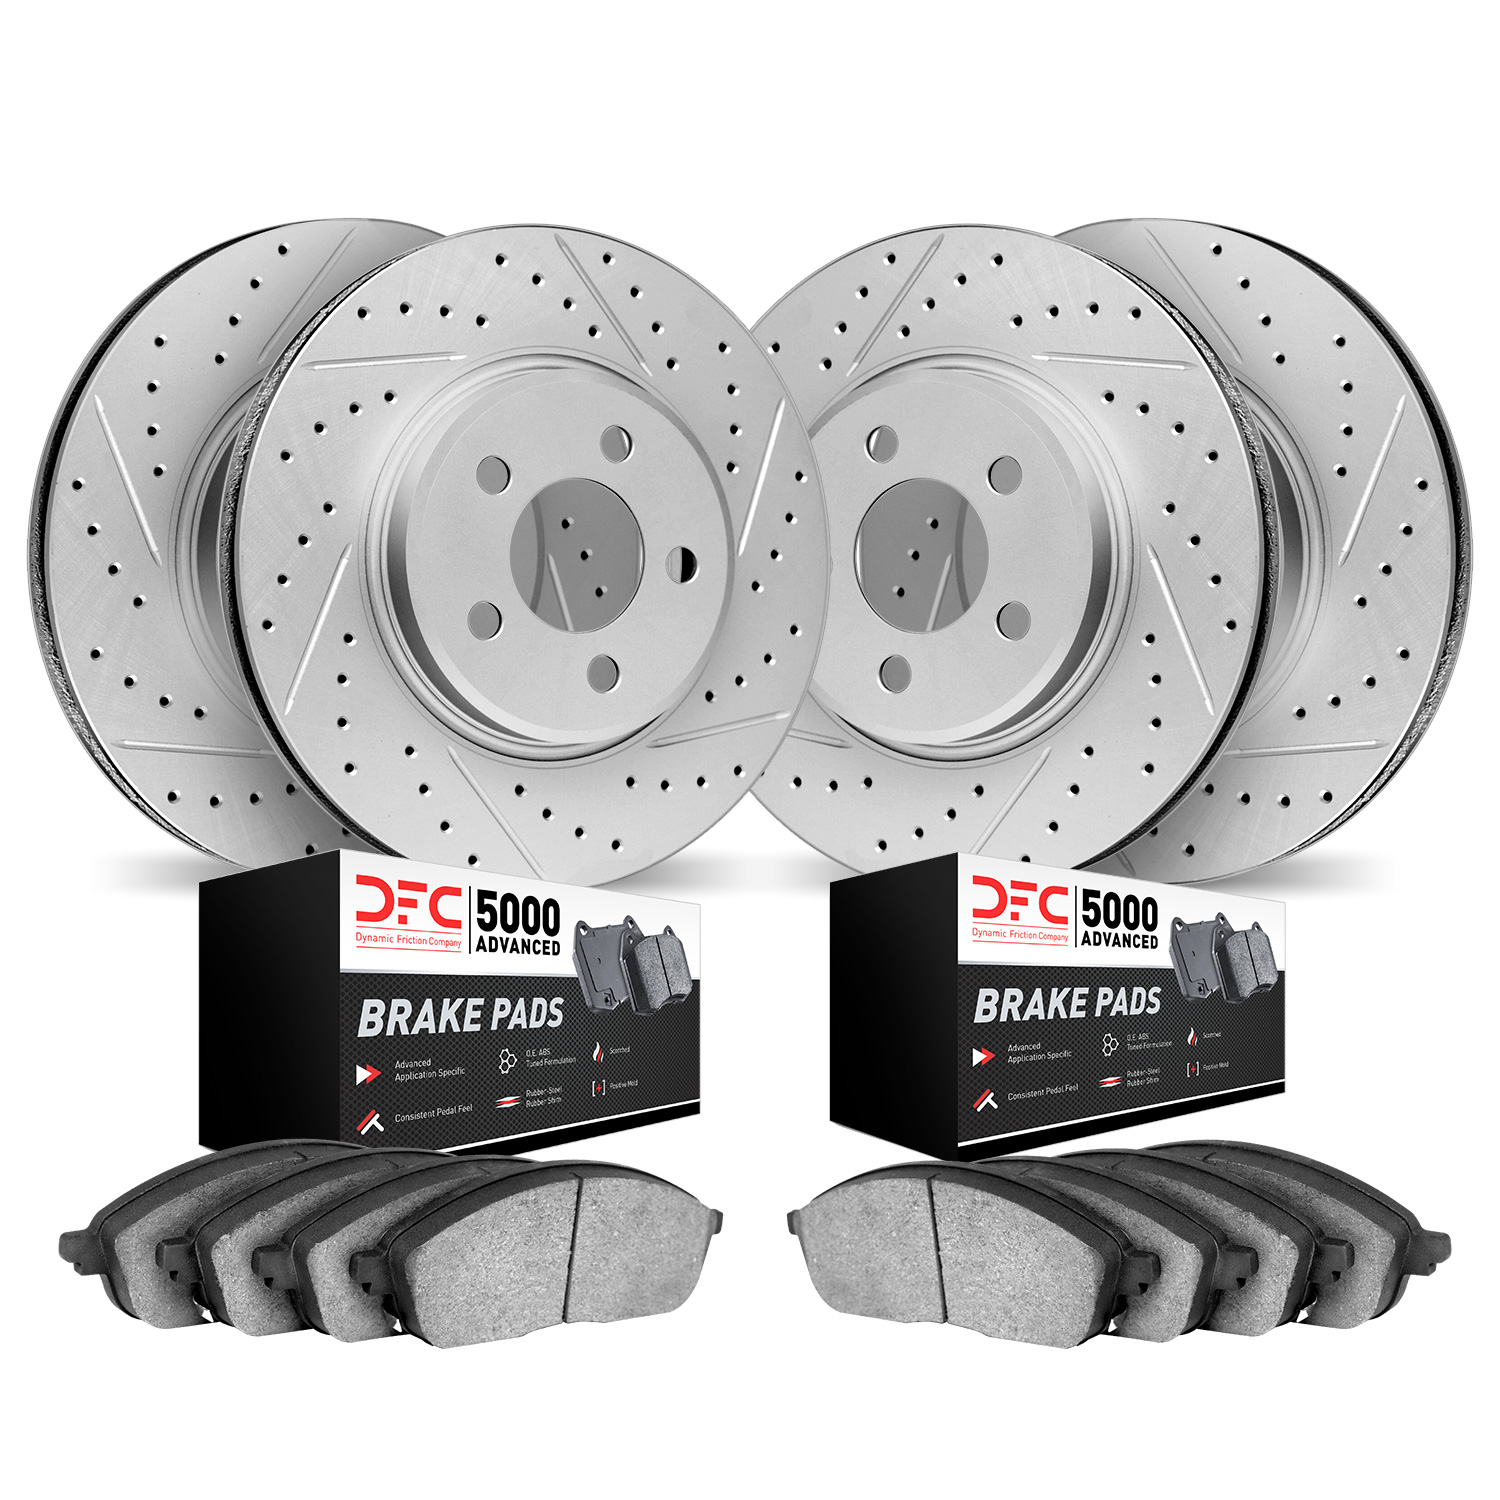 2504-75003 Geoperformance Drilled/Slotted Rotors w/5000 Advanced Brake Pads Kit, 2001-2006 Lexus/Toyota/Scion, Position: Front a